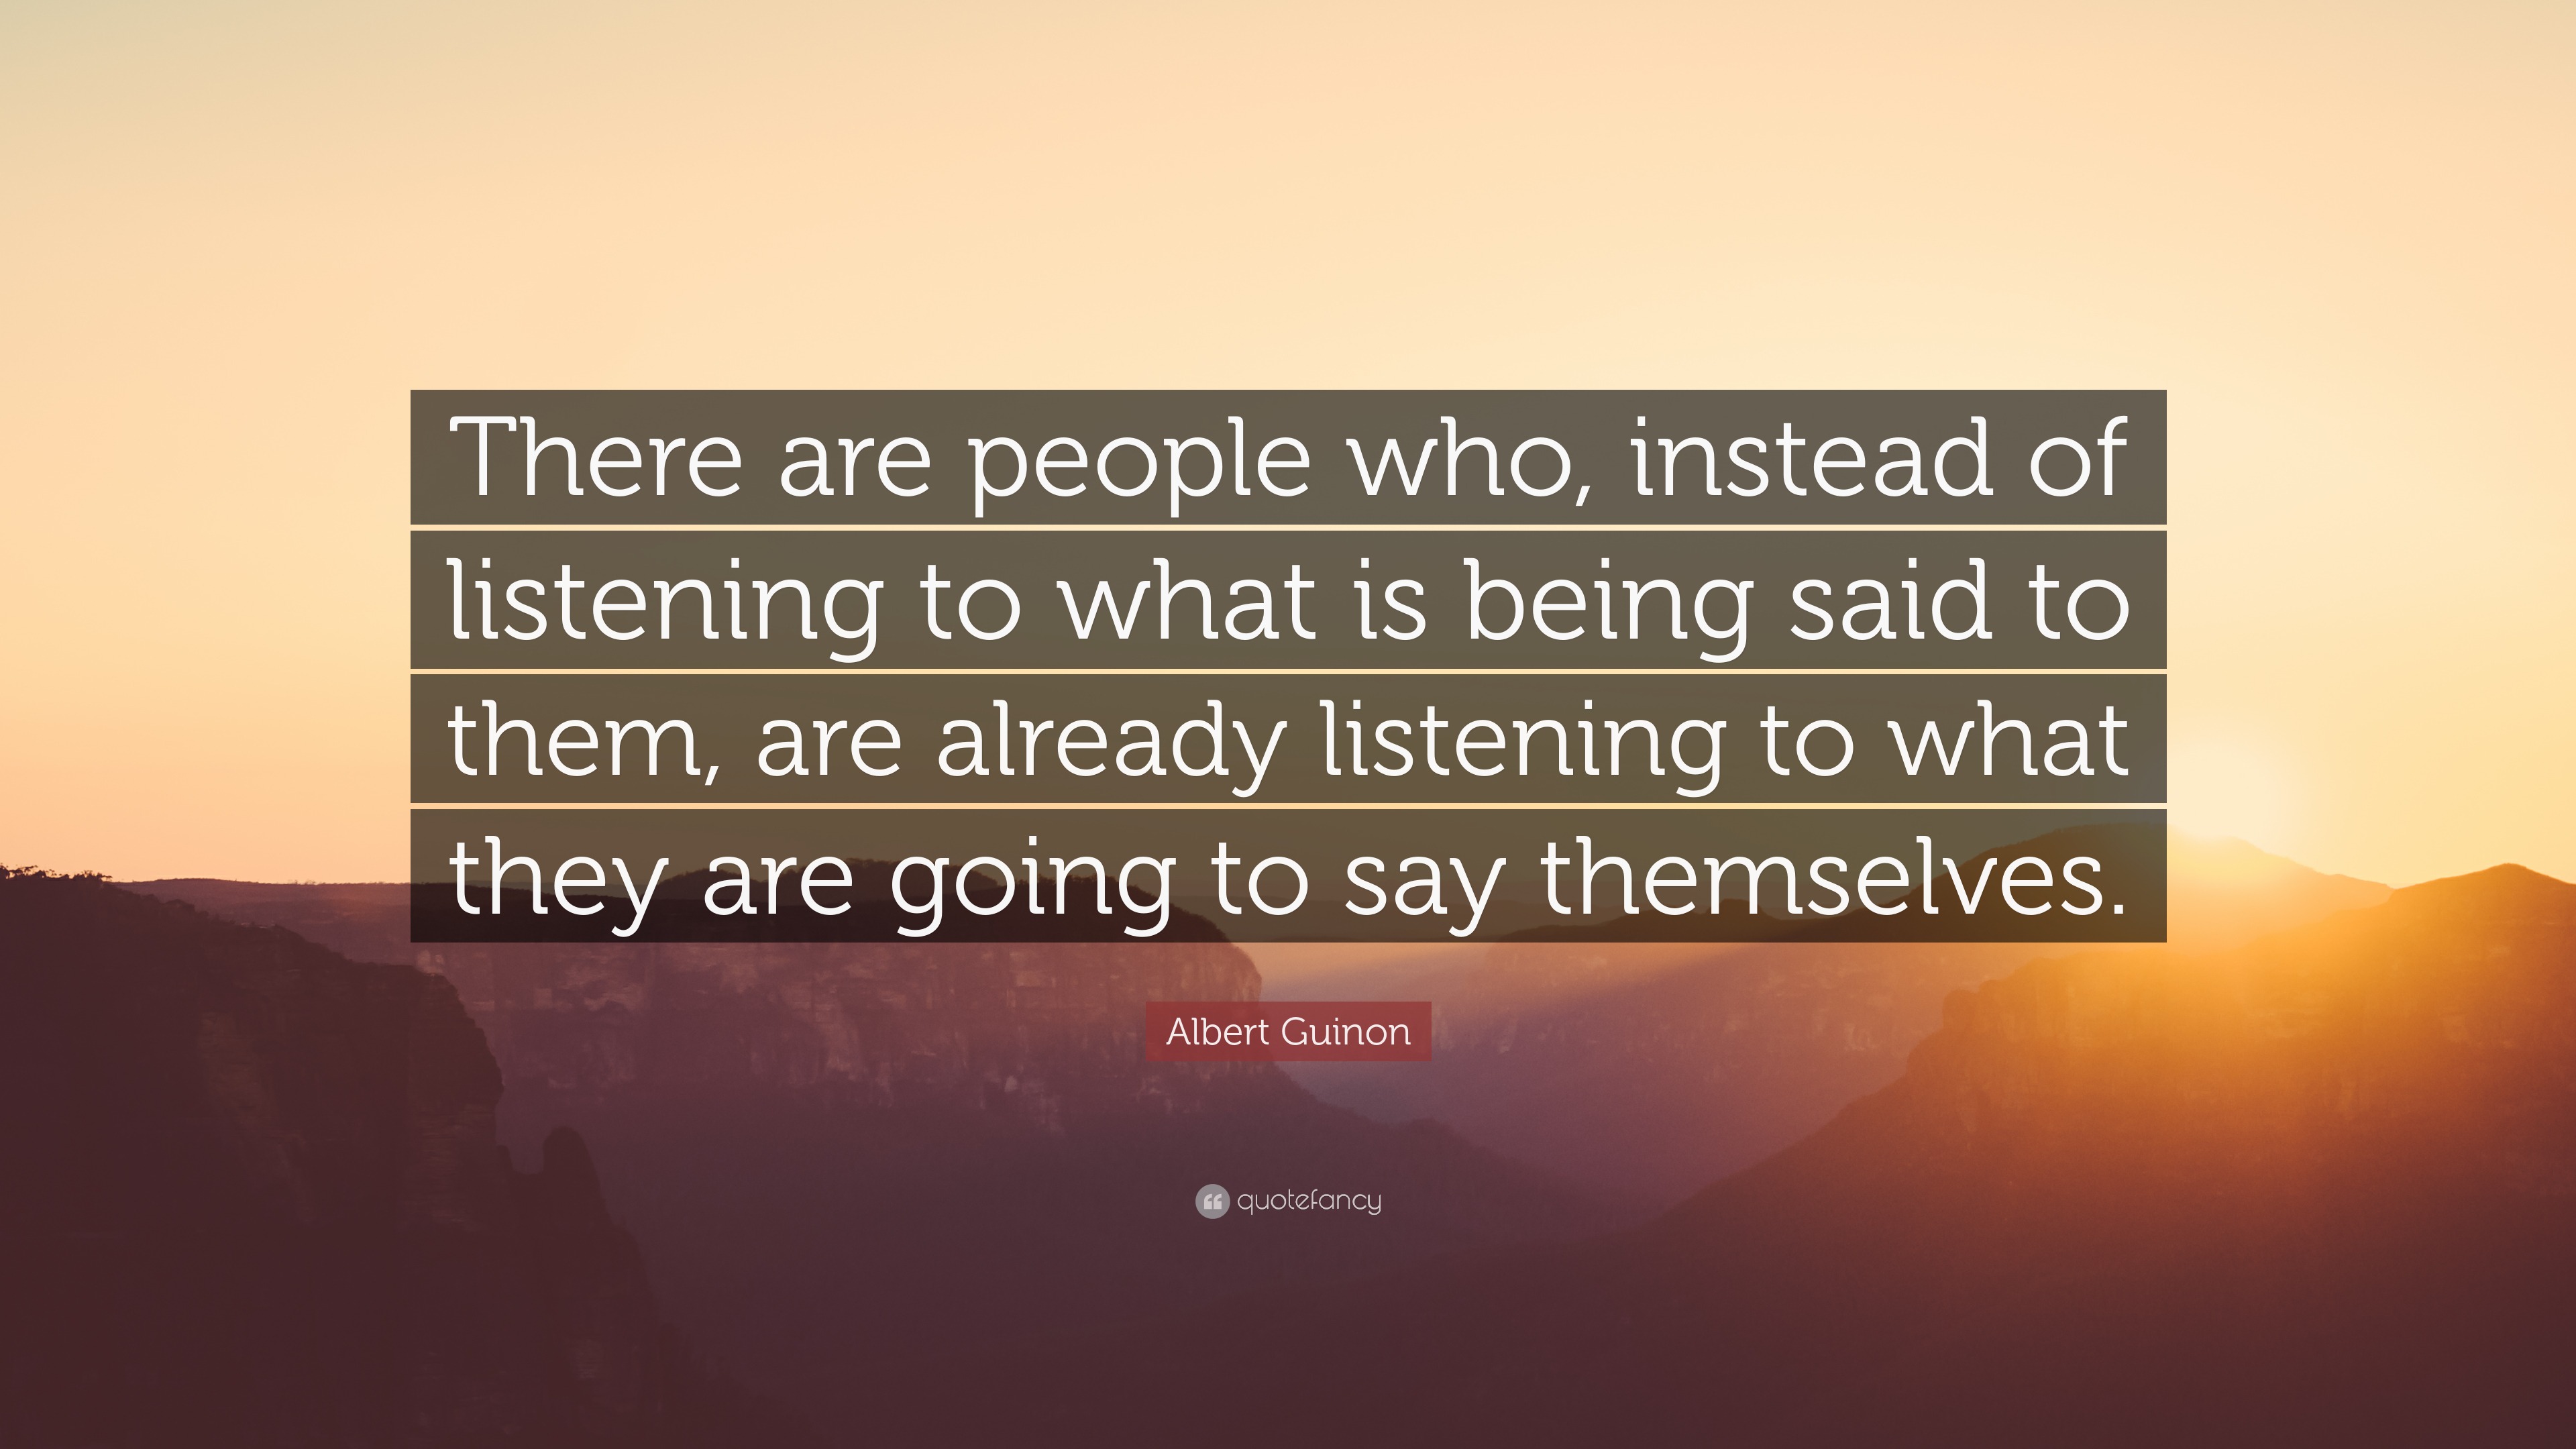 Albert Guinon Quote: “There are people who, instead of listening to ...